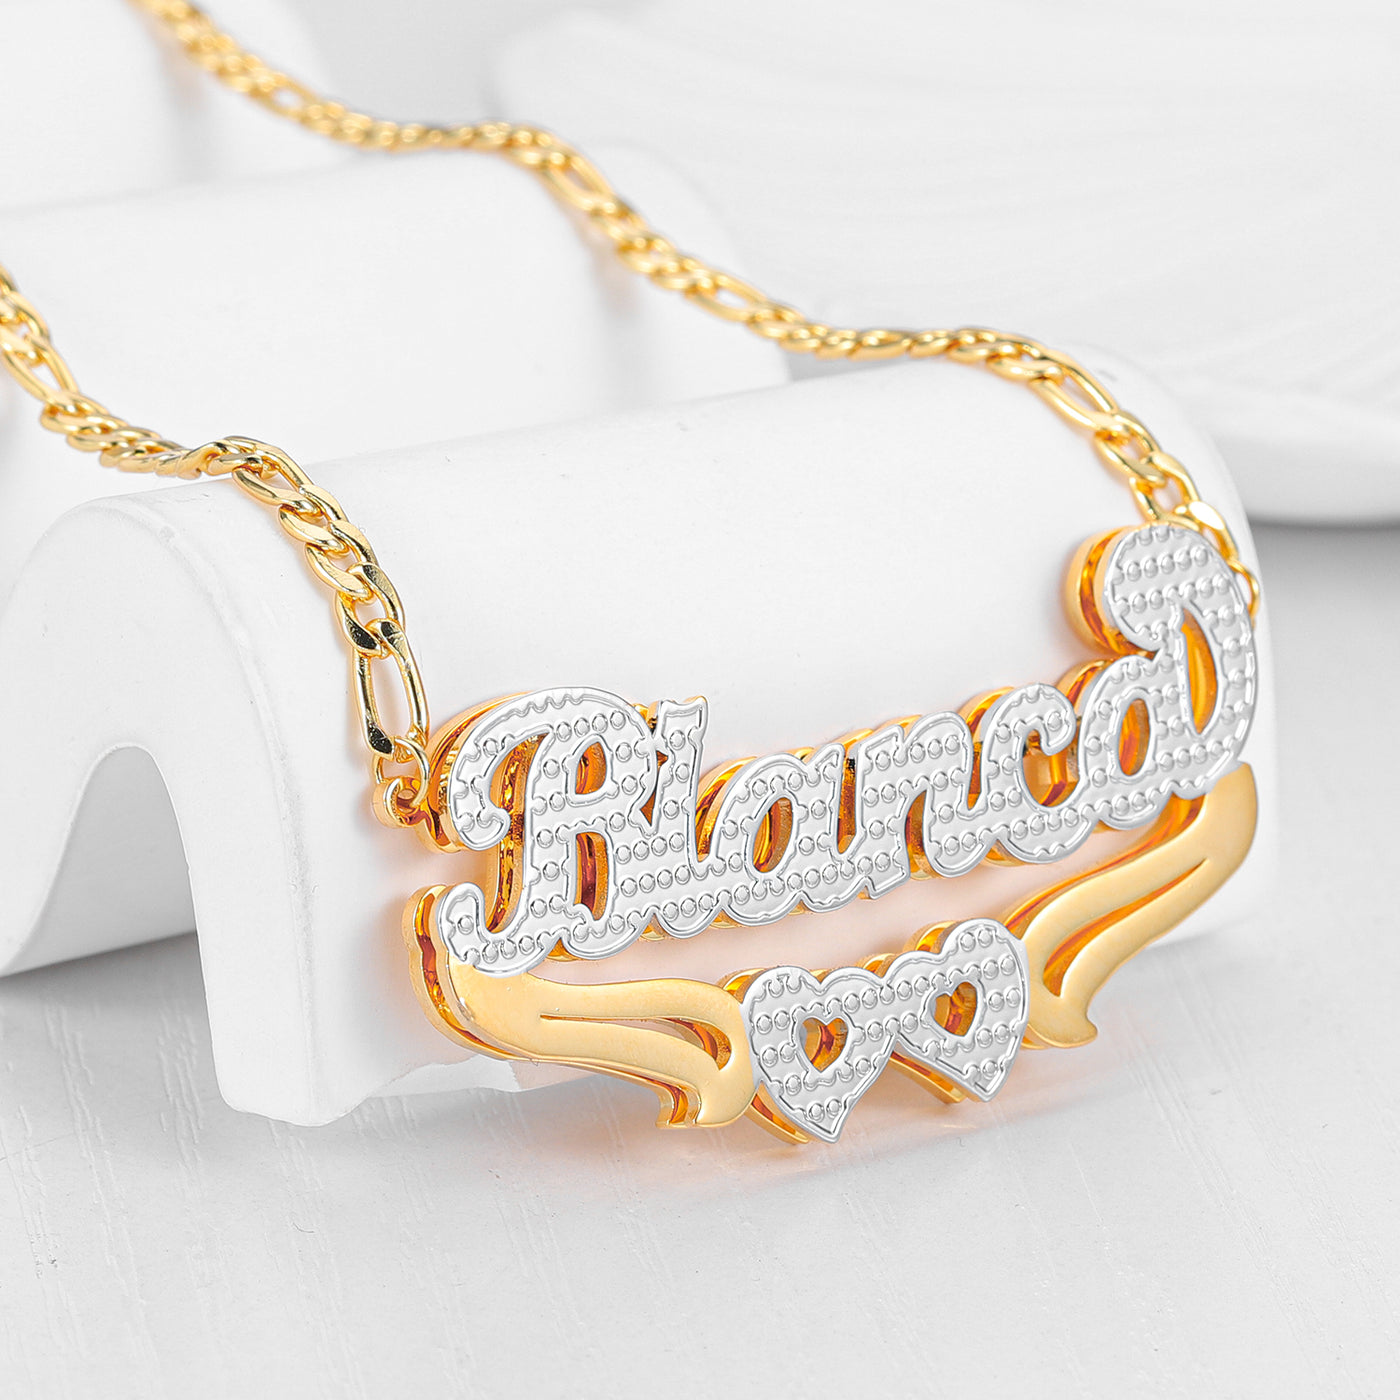 The Bianca necklace